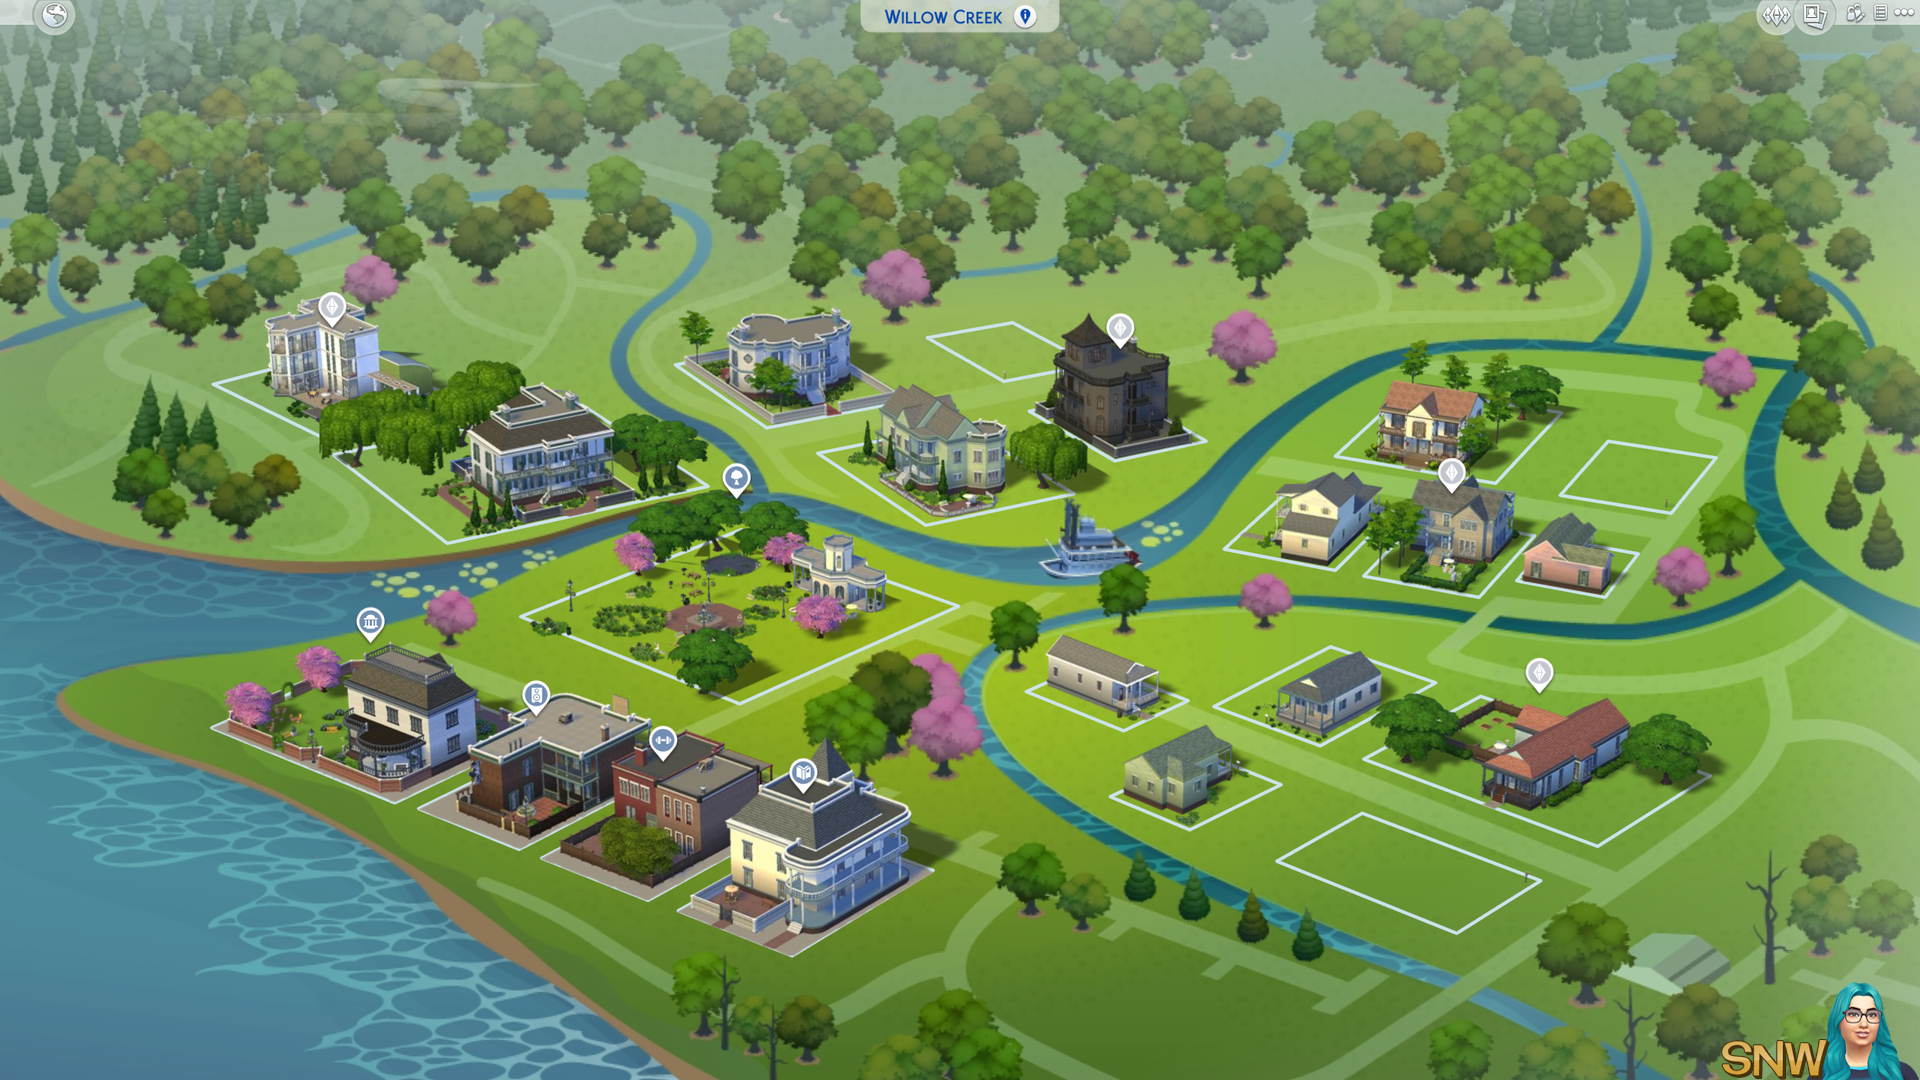 The Sims 4: Willow Creek world